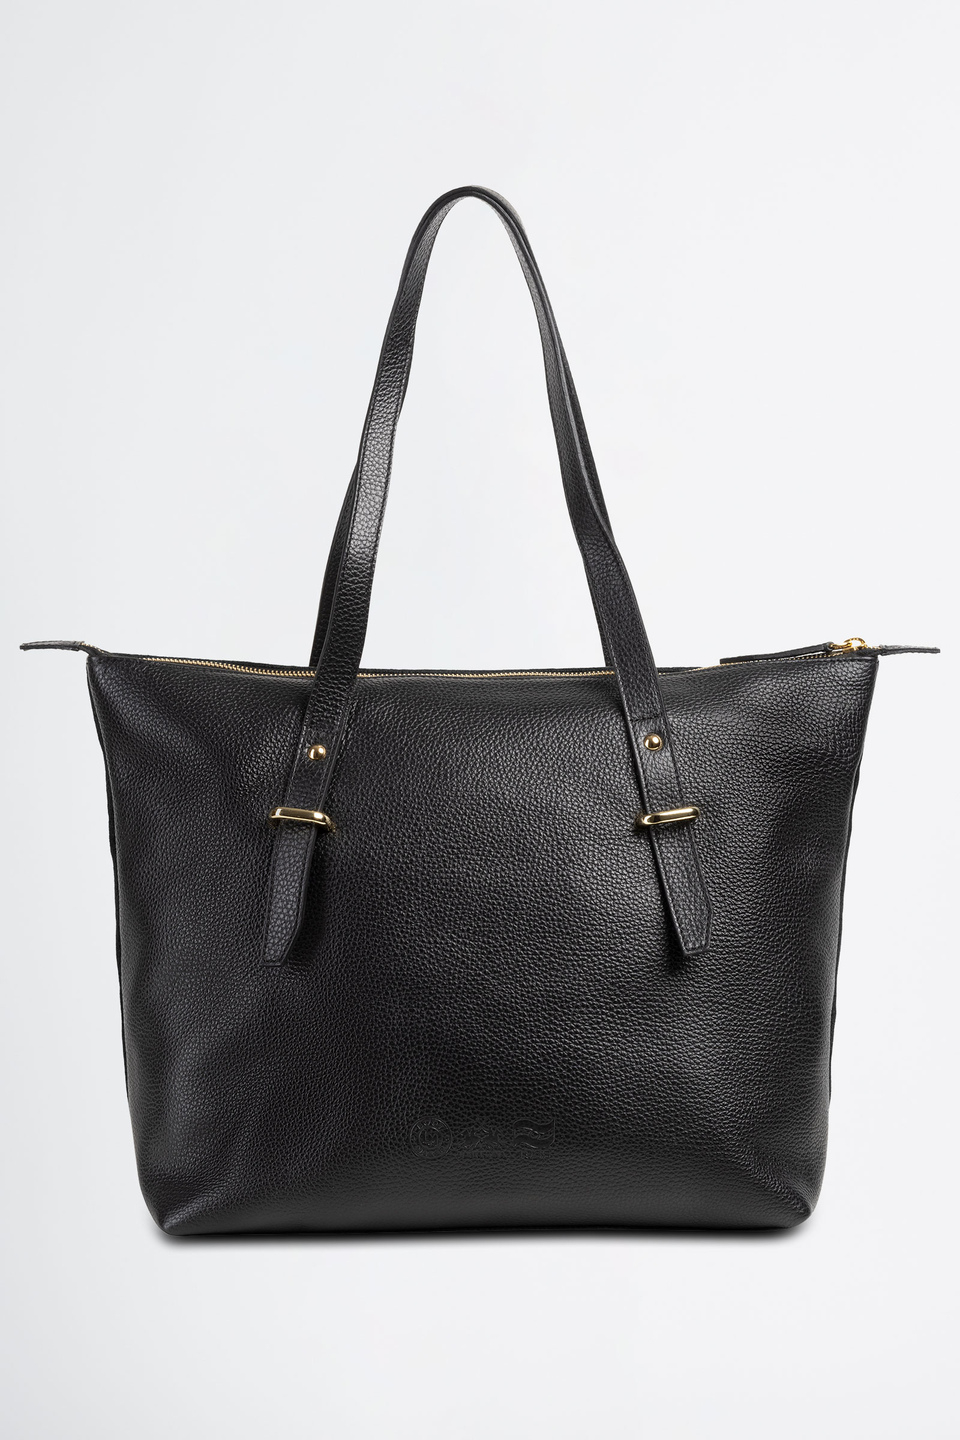 Double handle shopper in synthetic PU fabric | La Martina - Official Online Shop